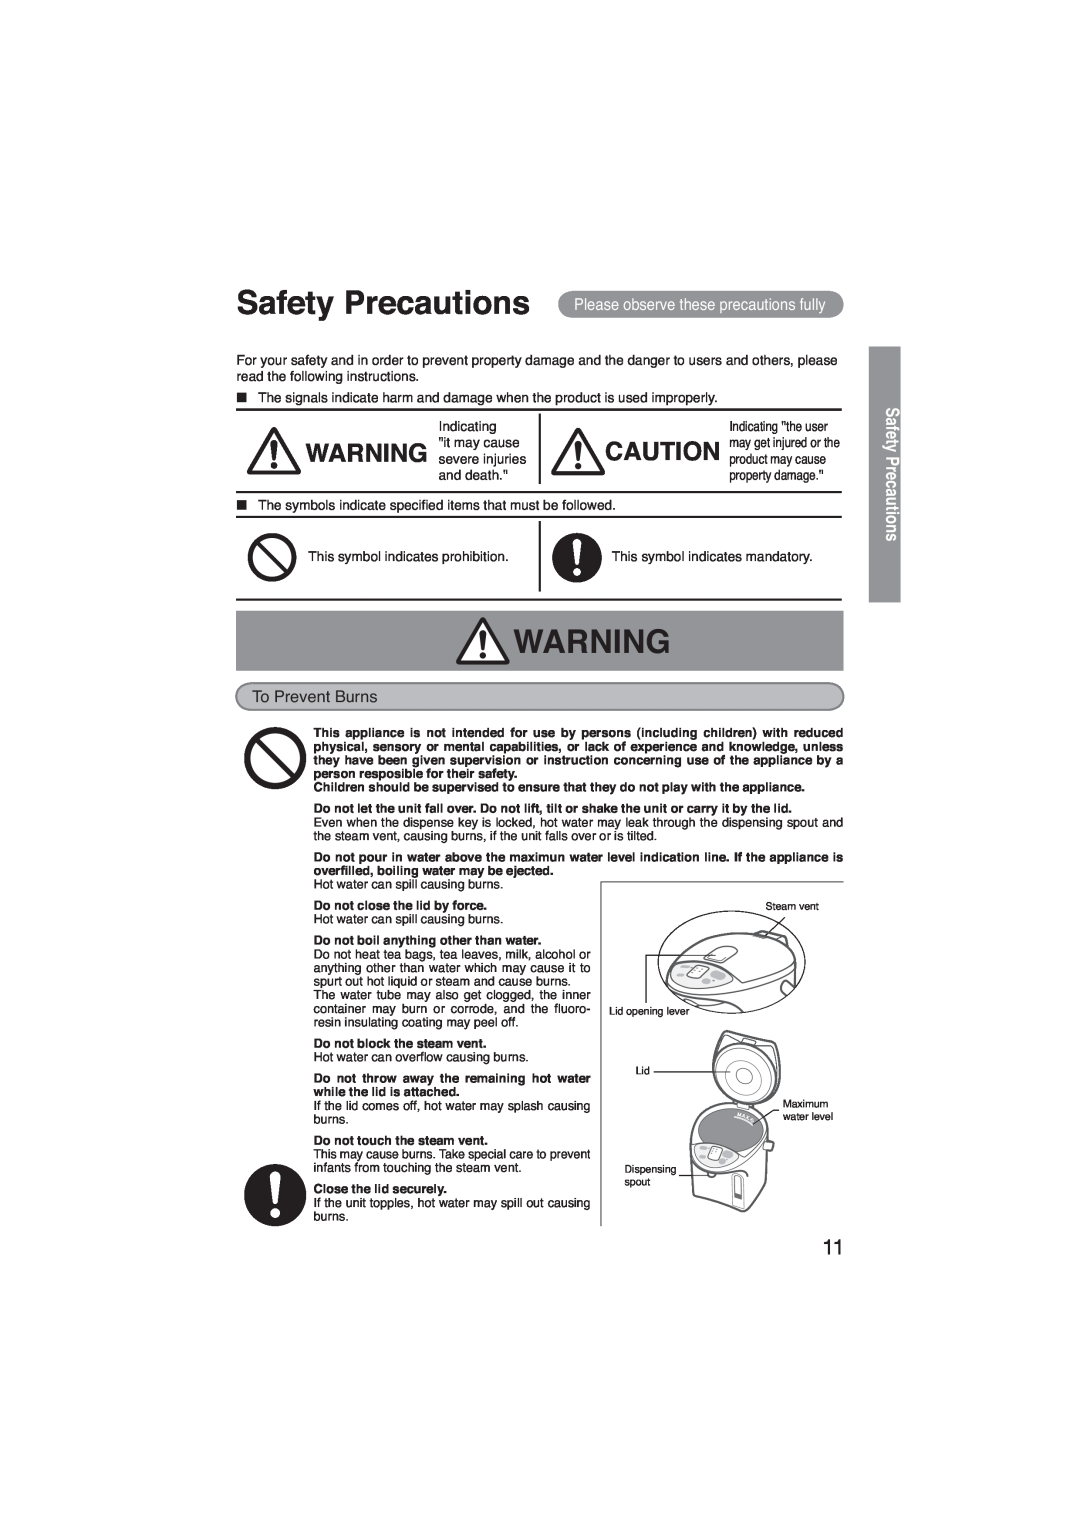 Panasonic NC-EH40P Safety Precautions Please observe these precautions fully, Indicating the user, property damage 